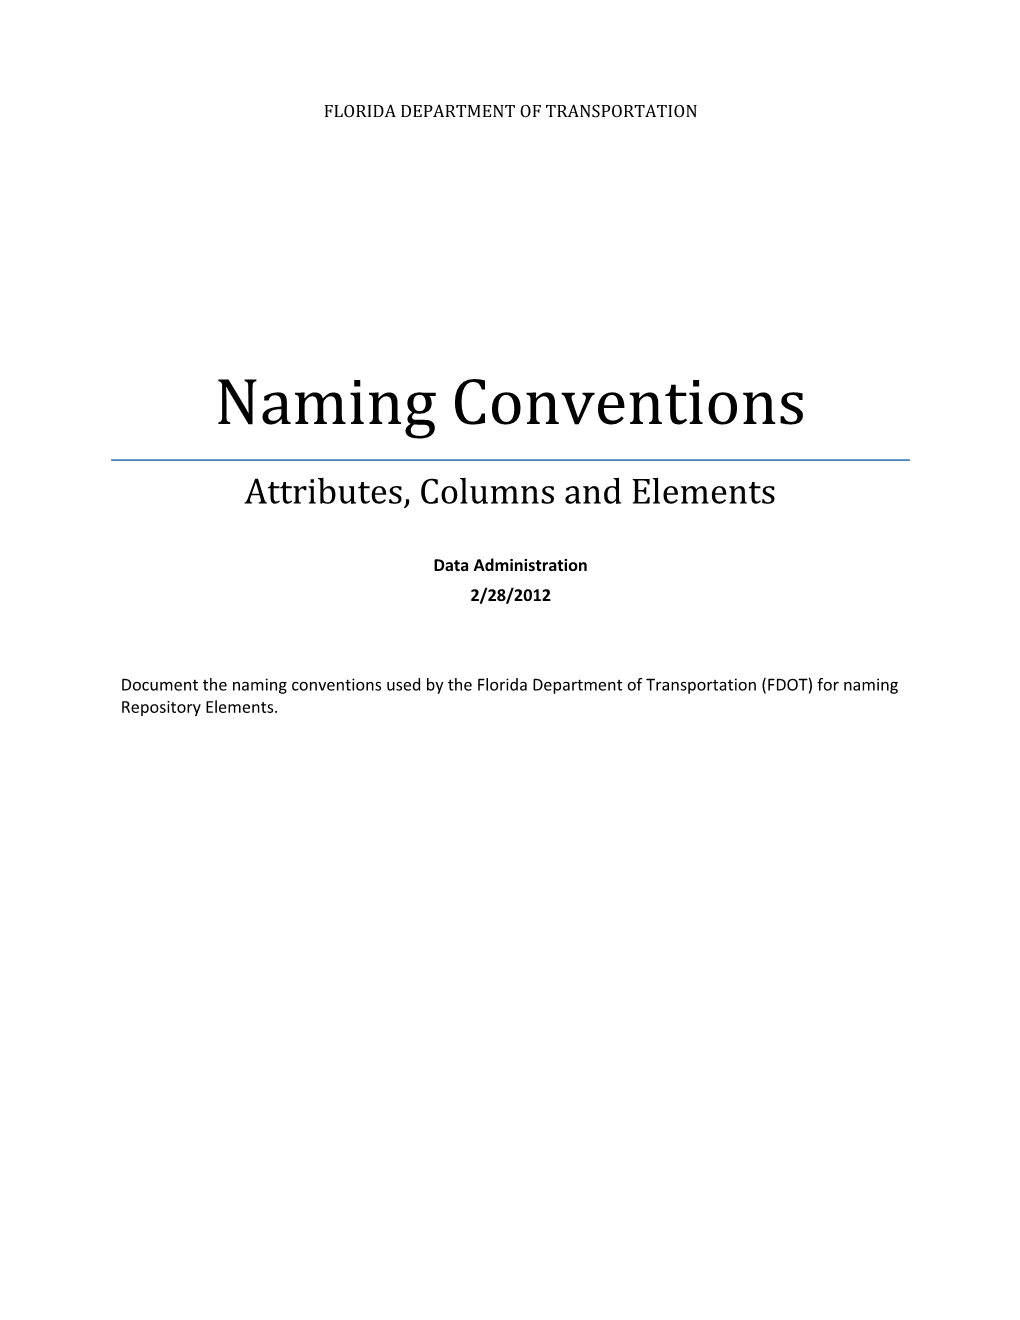 Element Naming Conventions